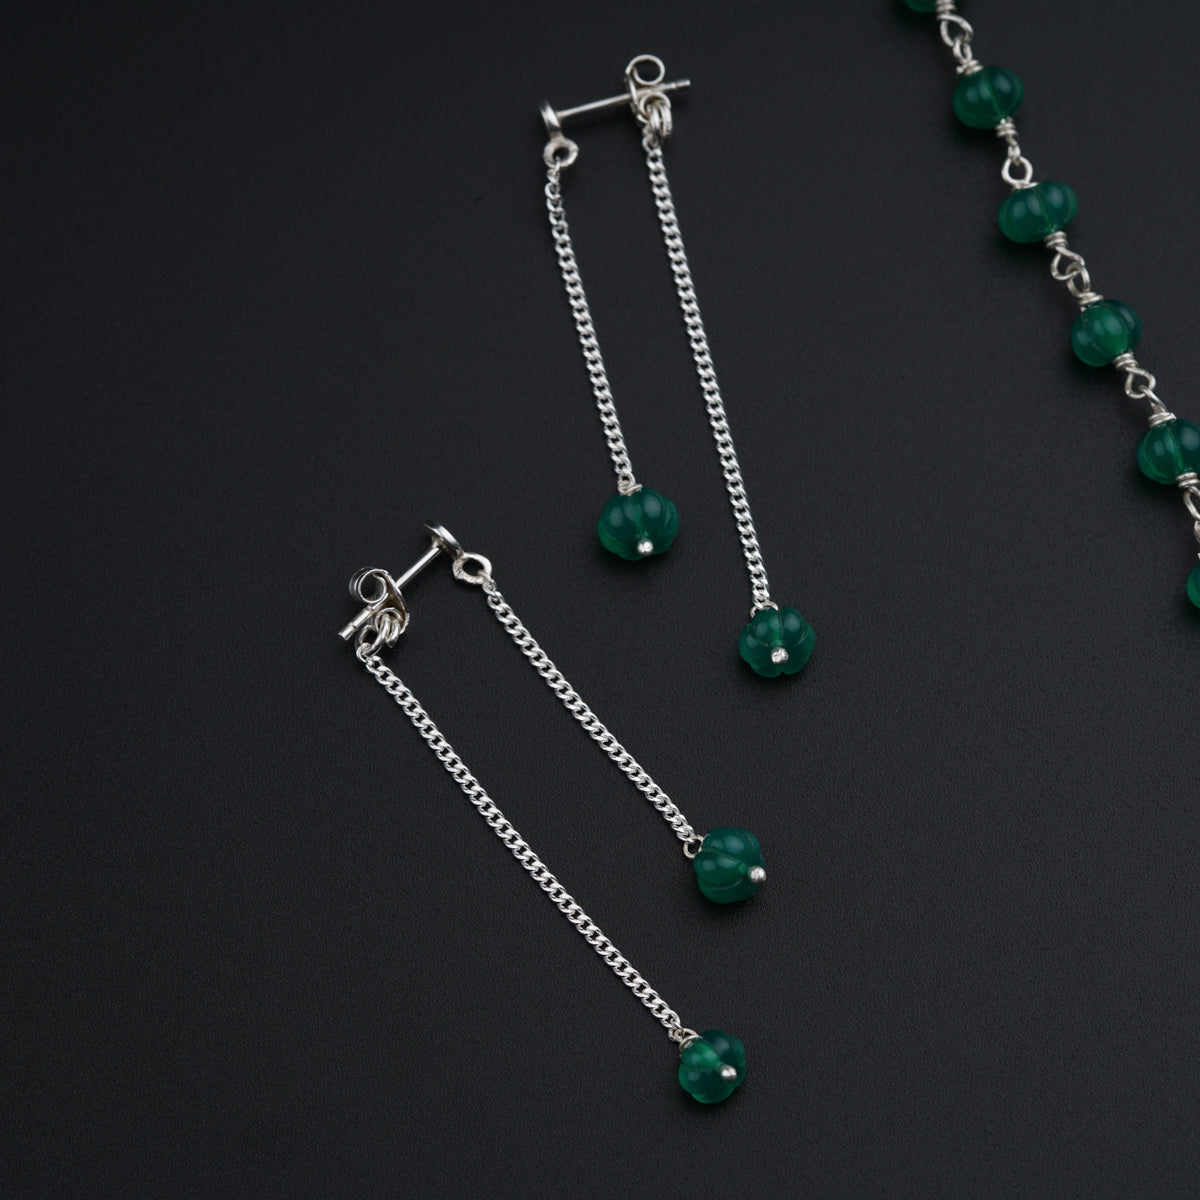 a pair of green beads and chains on a black surface